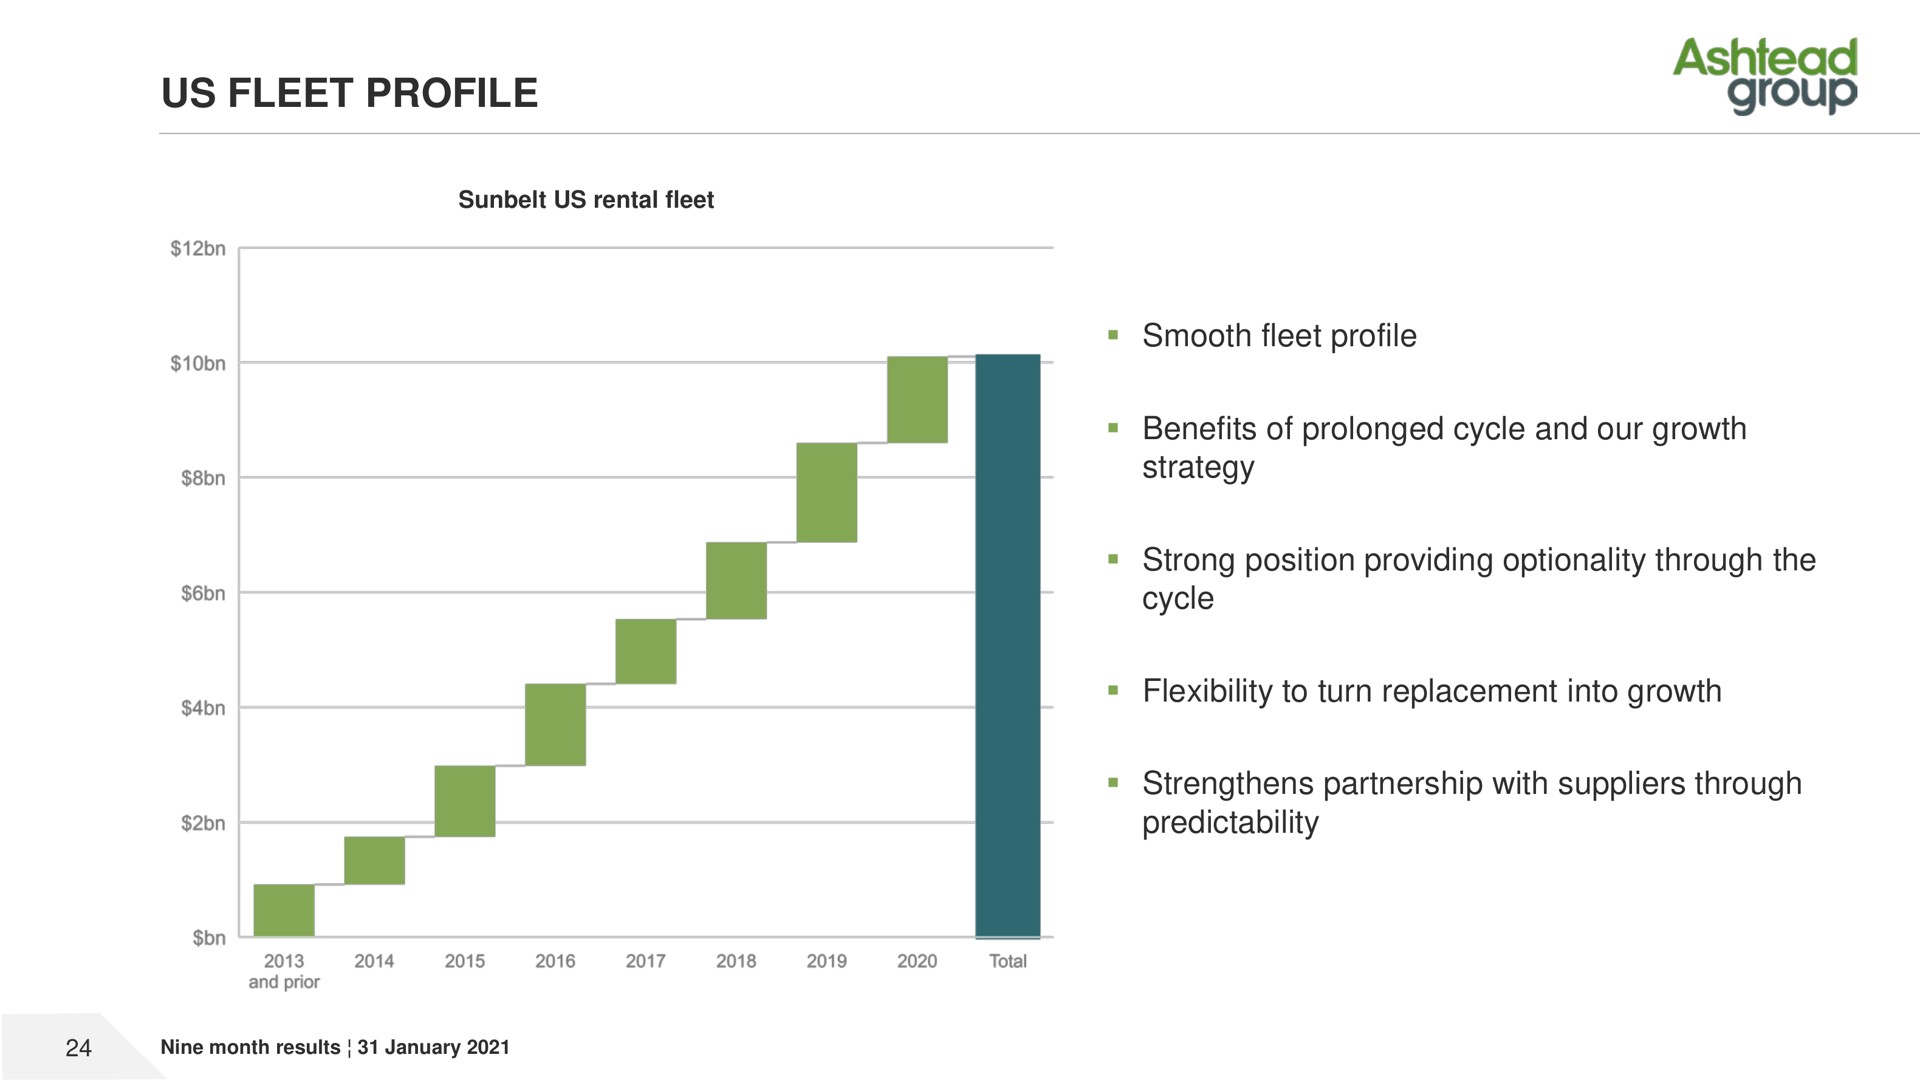 us fleet profile smooth fleet profile benefits of prolonged cycle and our growth strategy strong position providing optionality through the cycle flexibility to turn replacement into growth strengthens partnership with suppliers through predictability group son | Ashtead Group